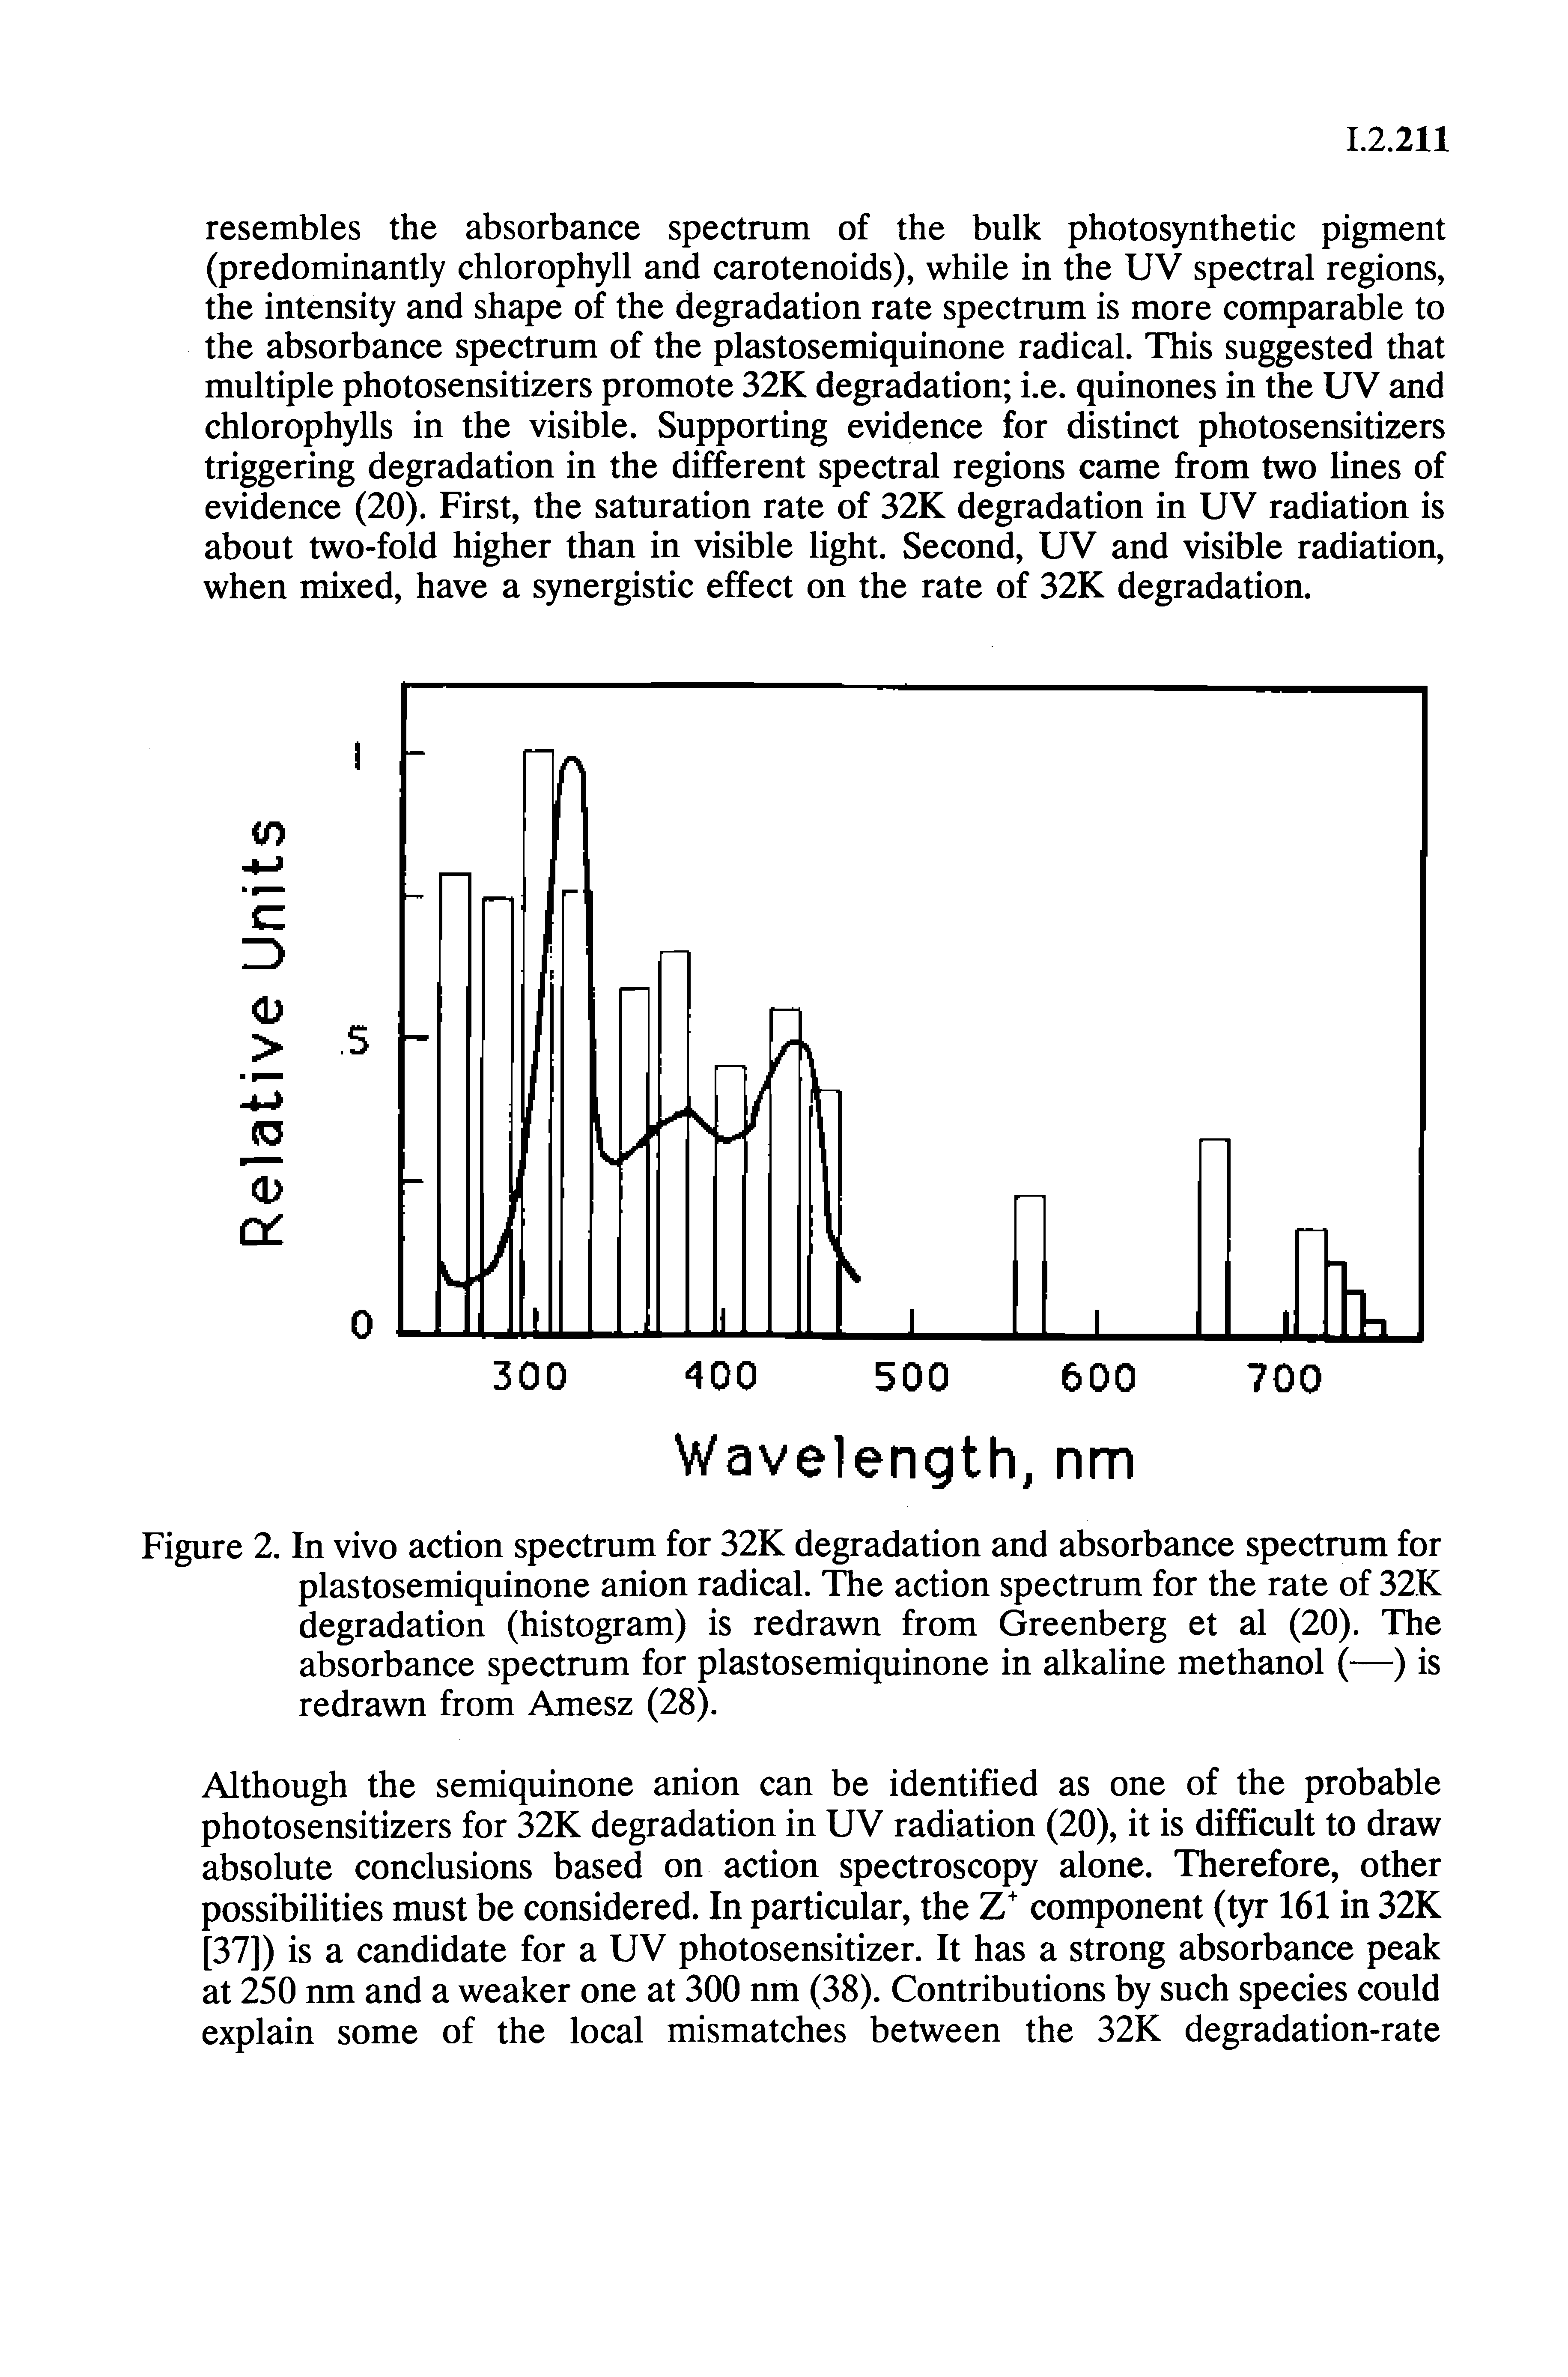 Figure 2. In vivo action spectrum for 32K degradation and absorbance spectrum for plastosemiquinone anion radical. The action spectrum for the rate of 32K degradation (histogram) is redrawn from Greenberg et al (20). The absorbance spectrum for plastosemiquinone in alkaline methanol (—) is redrawn from Amesz (28).